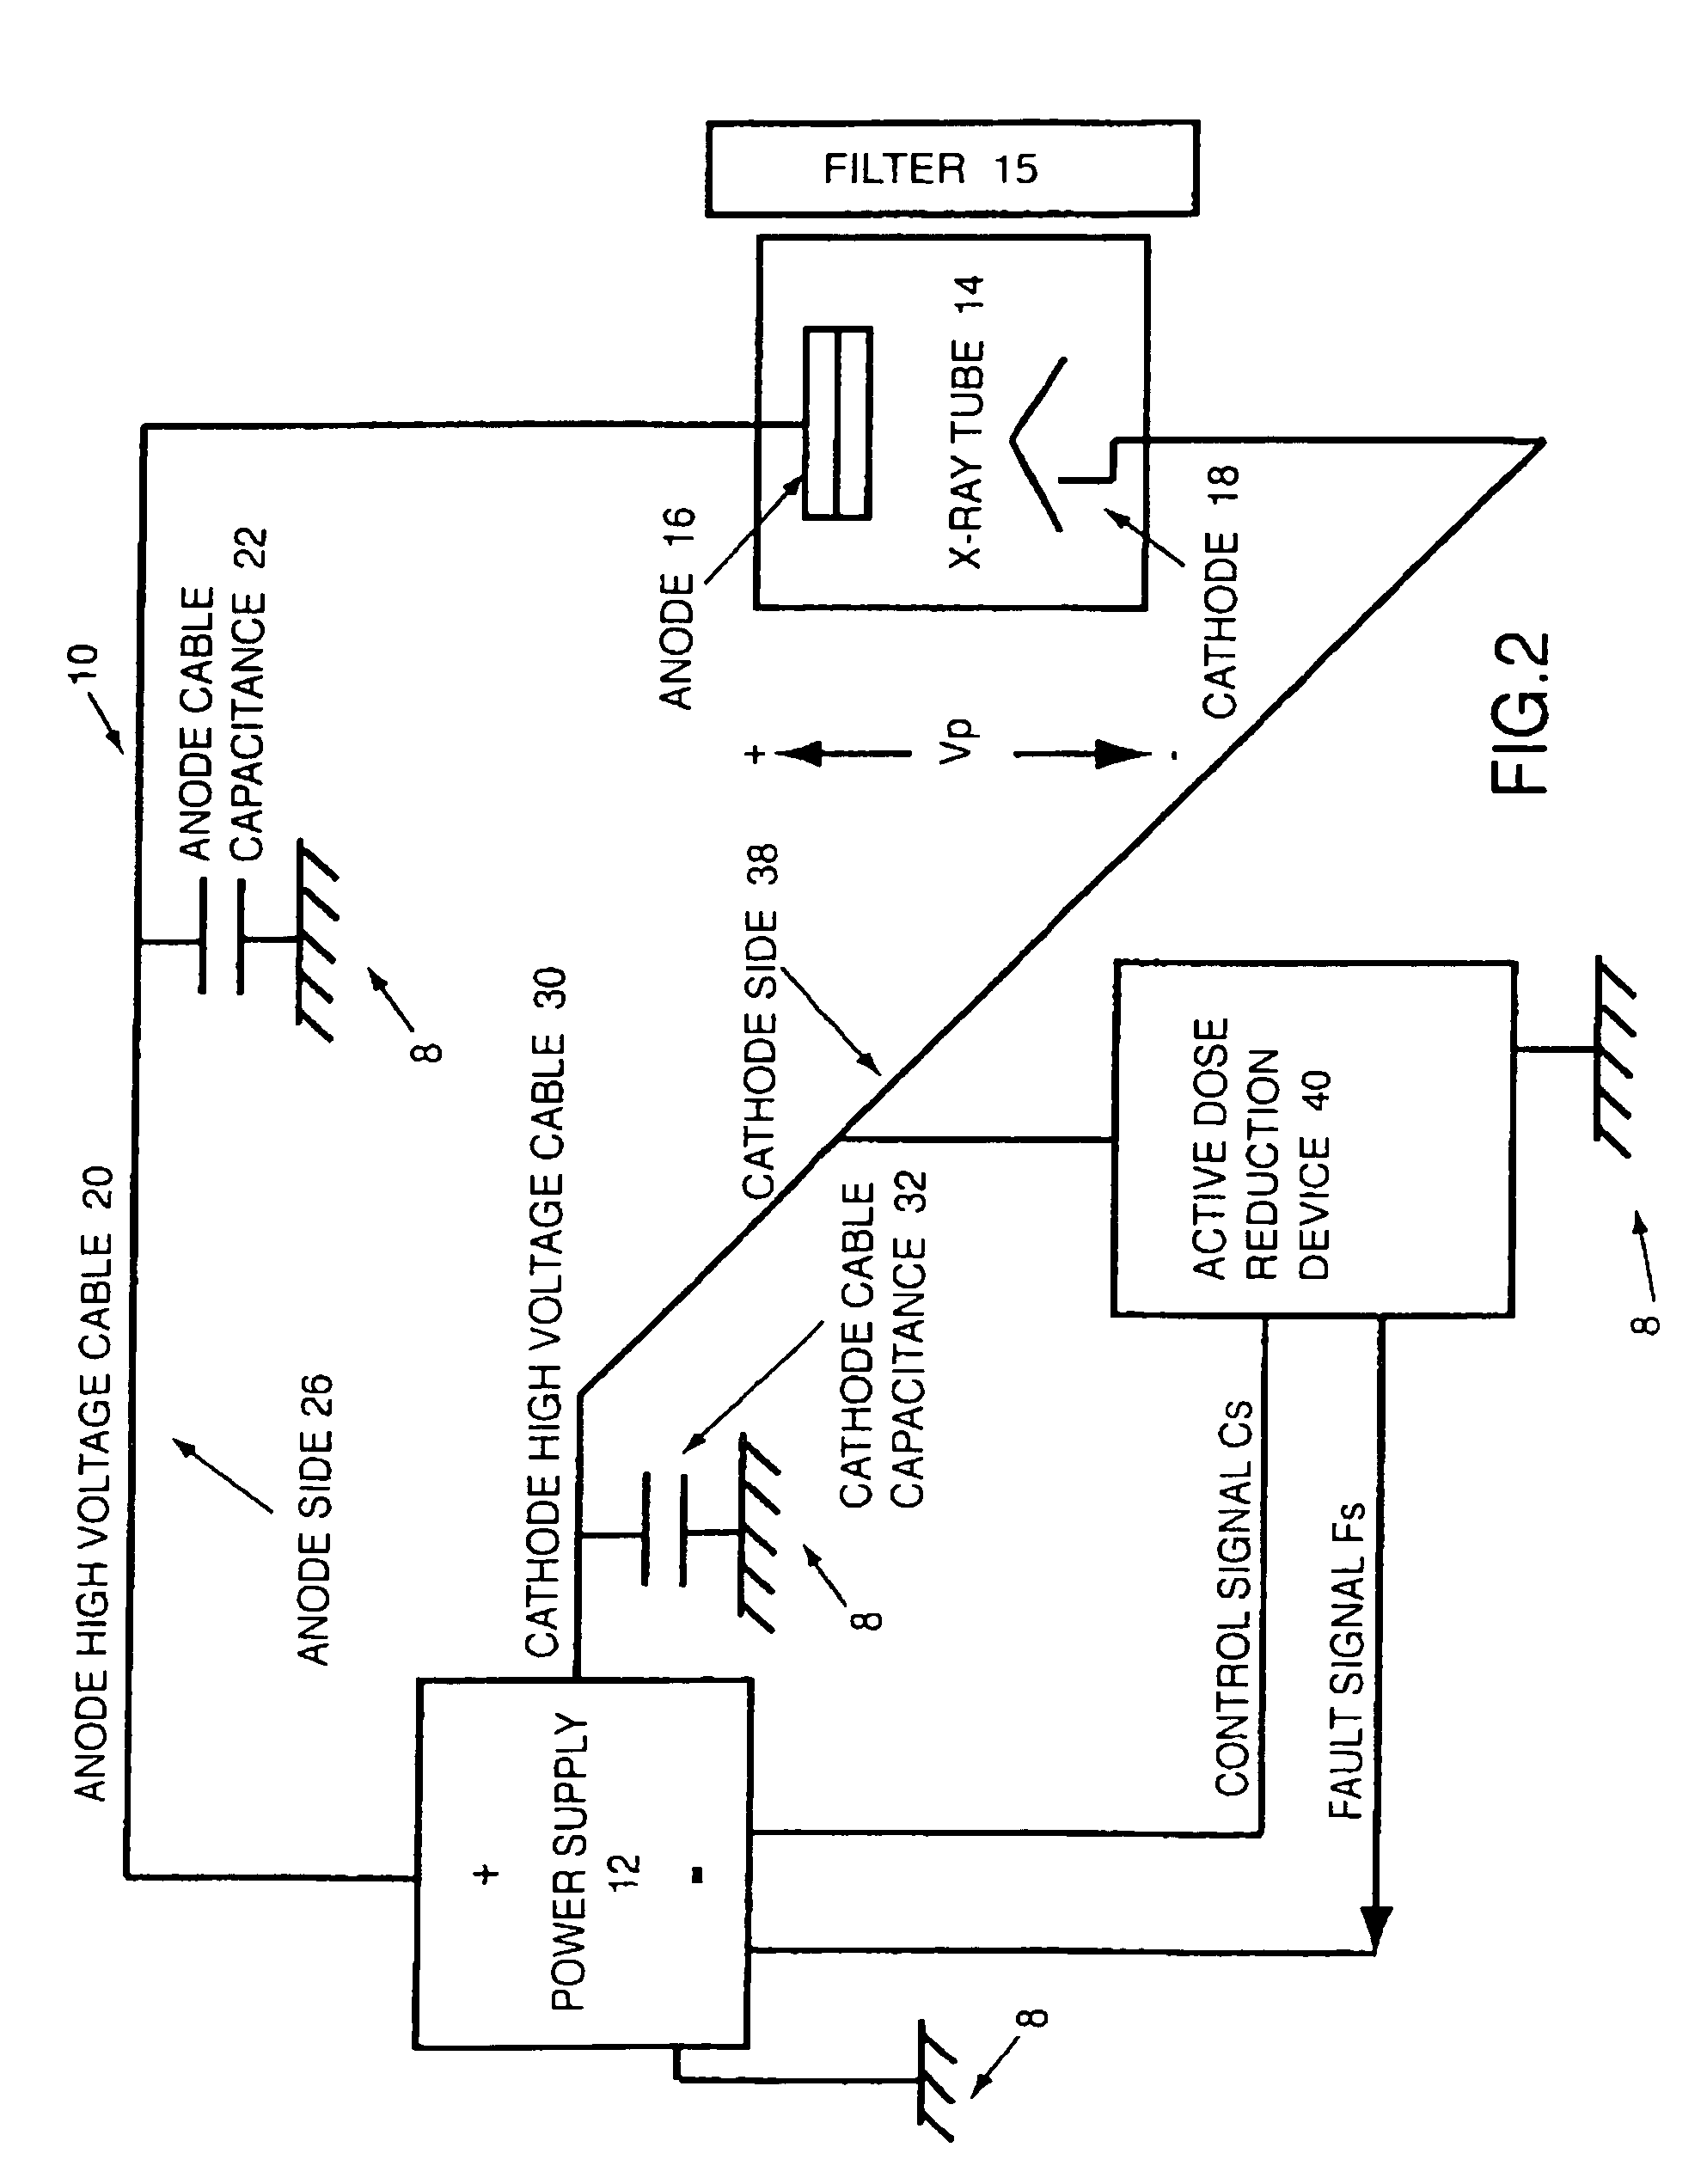 Active dose reduction device and method